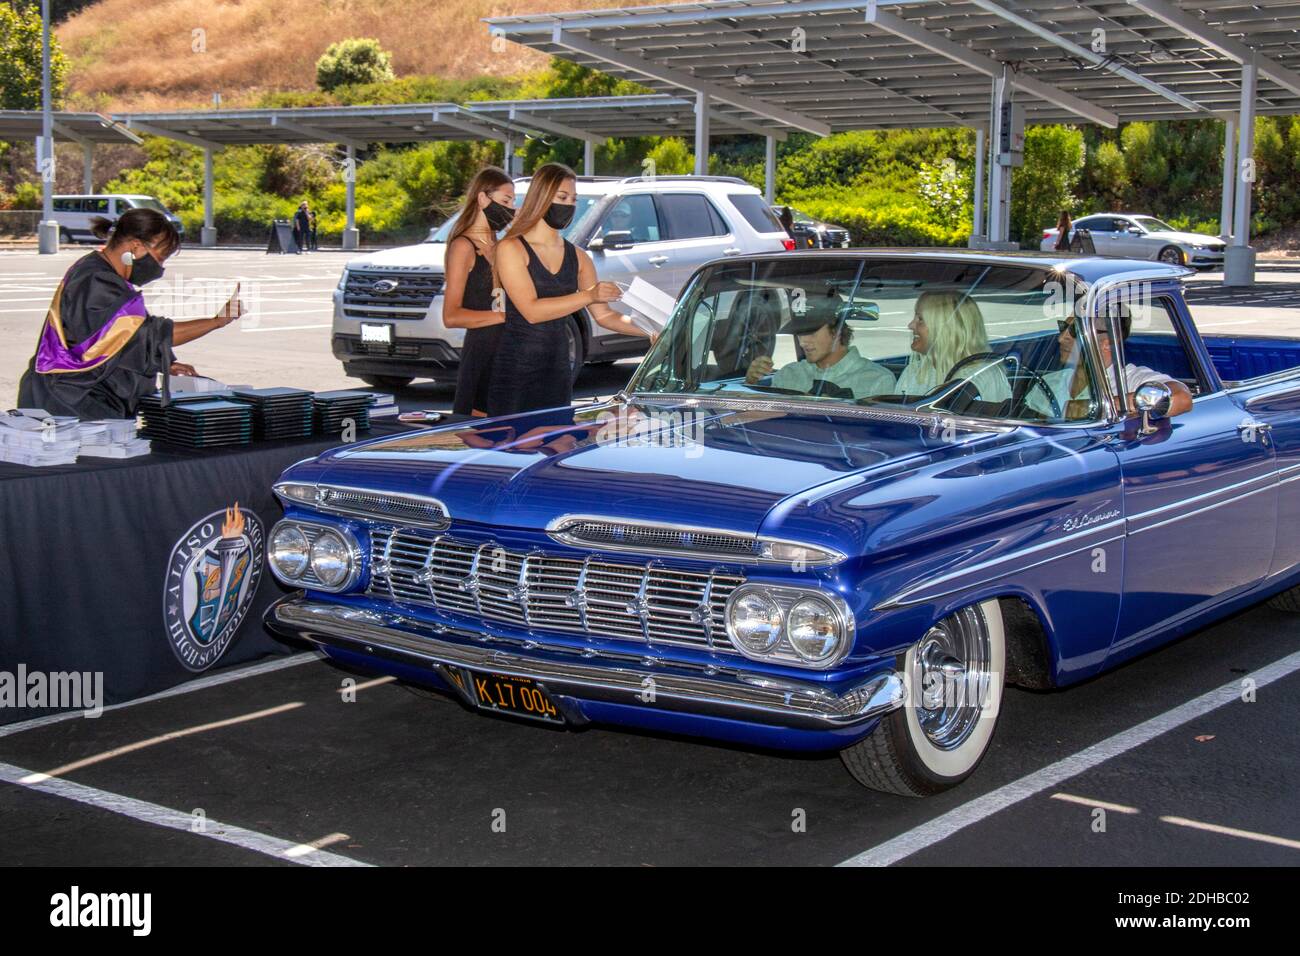 Wearing face masks due to the coronavirus pandemic, student assistants give a diploma to a graduating senior in a 1959 Chevrolet El Camino during driv Stock Photo